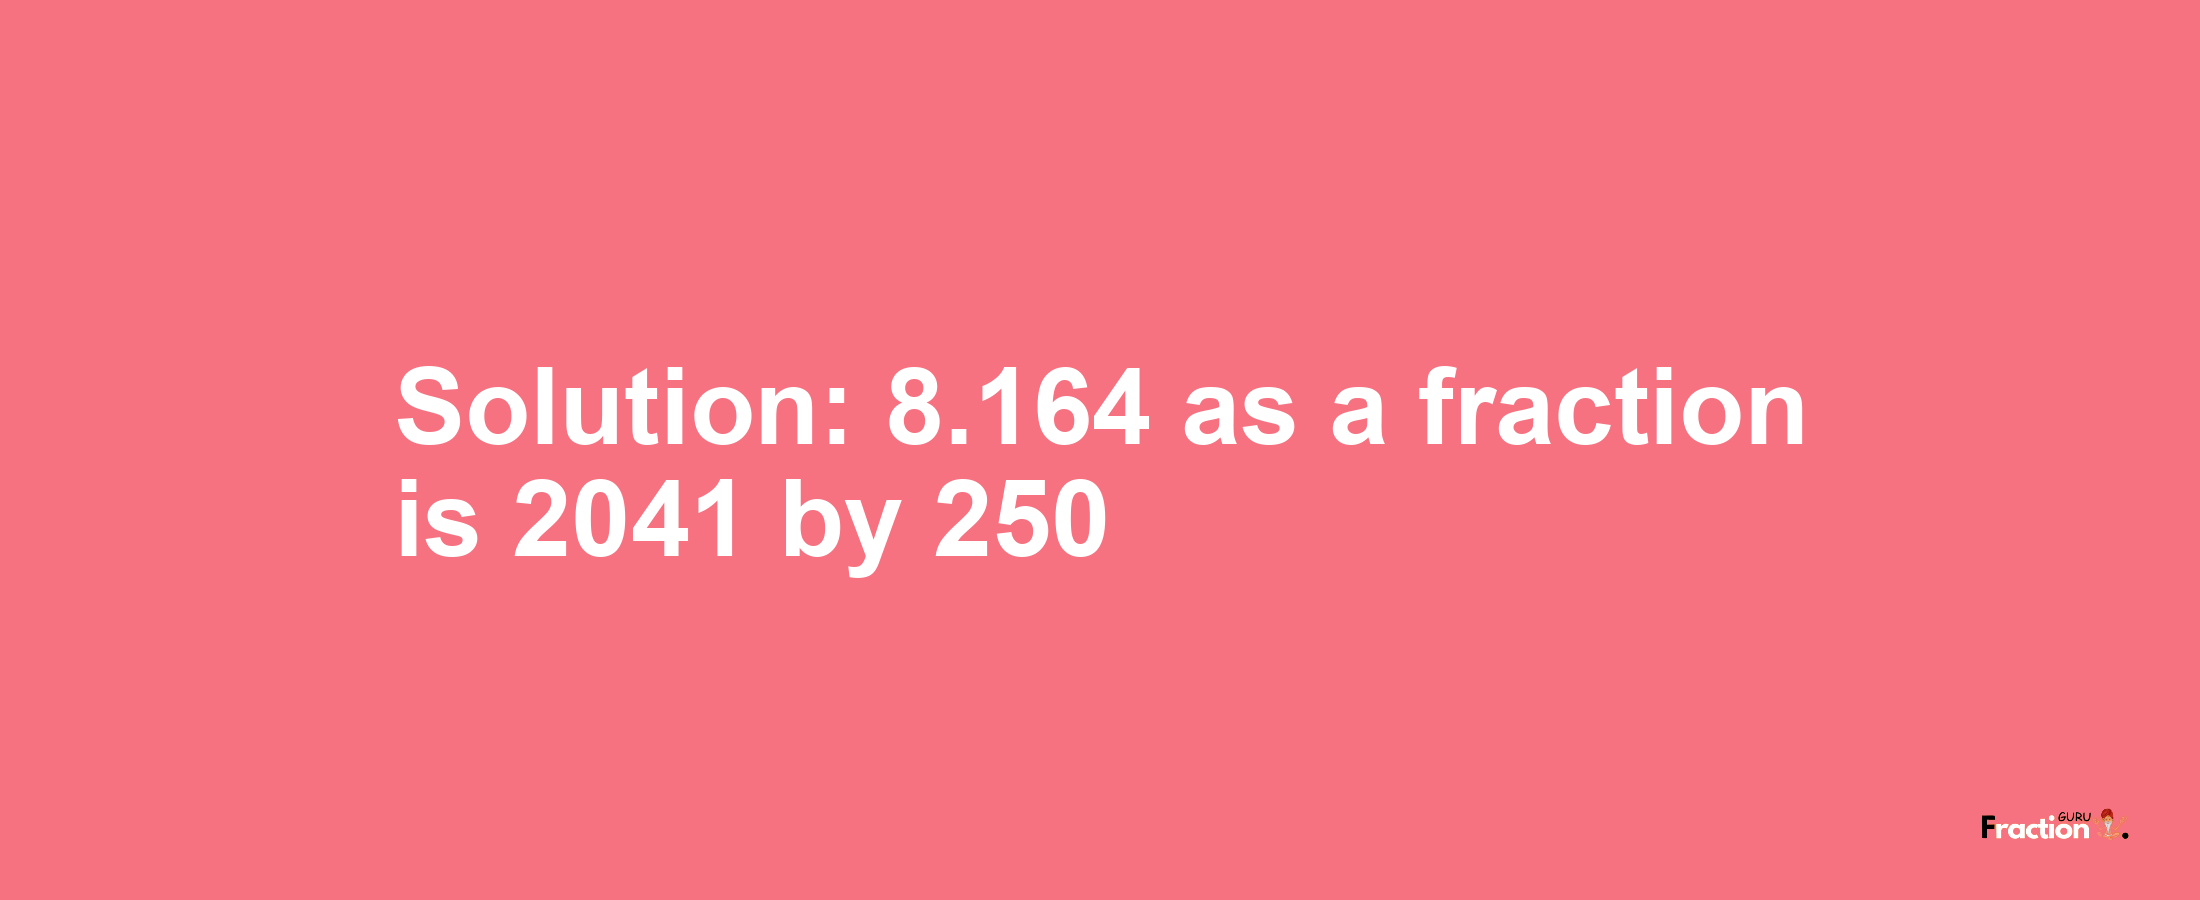 Solution:8.164 as a fraction is 2041/250